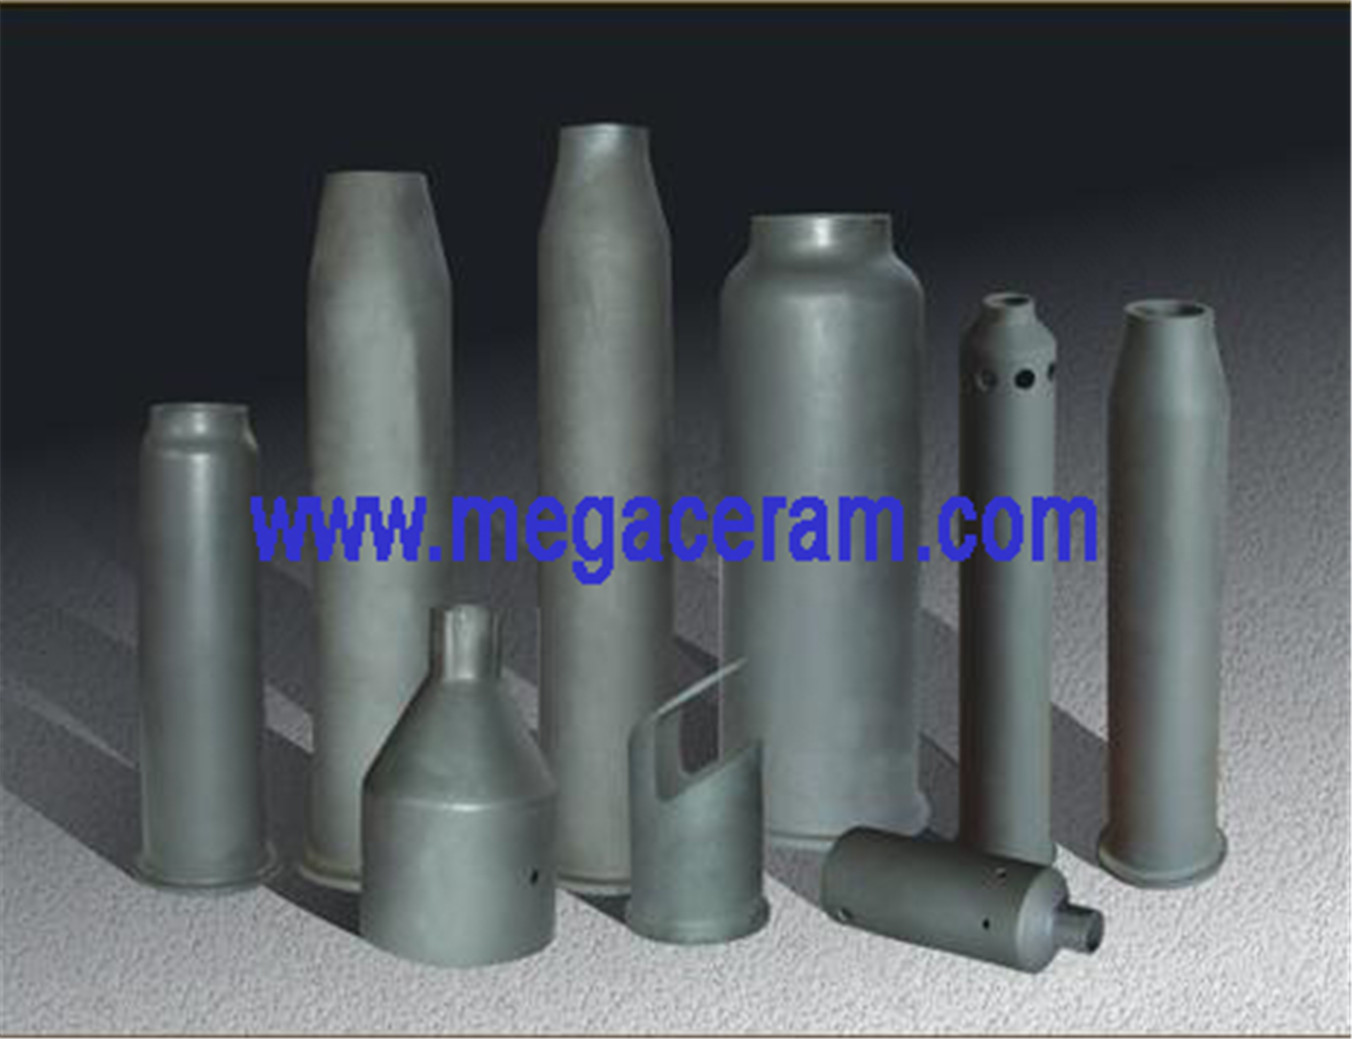 Chinese (Reaction Boned Silicon Carbide /RBSIC) SISIC Burner Nozzle